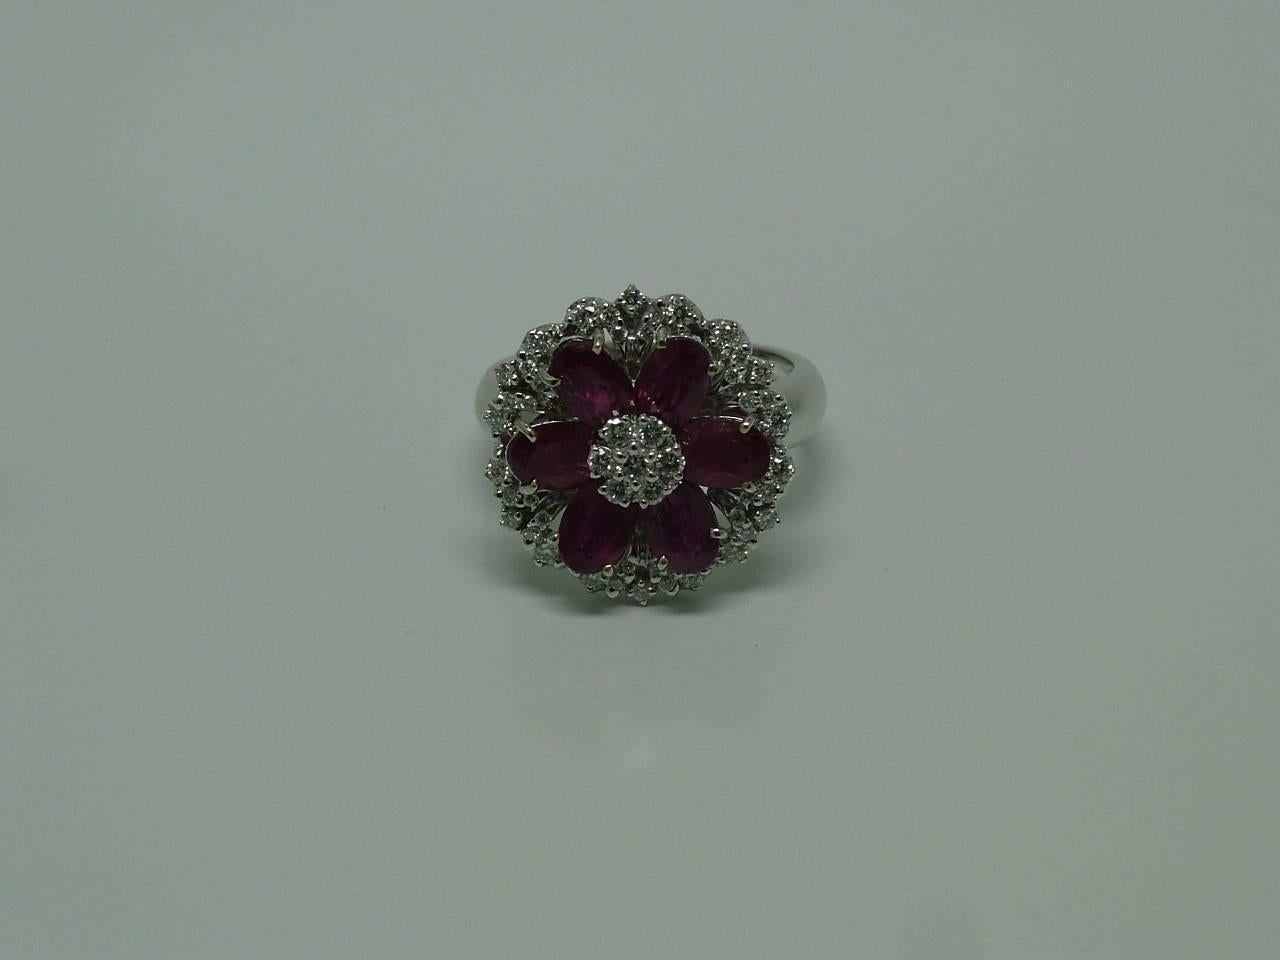 A diamond ruby cluster ring designed as a flower where petals are oval shaped rubies within a surround of diamonds.

MEASURES: 
Front measures: 17mm (frontis)
Internal diameter measures: 17,6 mm

SIZE: 
 15 EU - 7.25 US
Ring sits approx. 